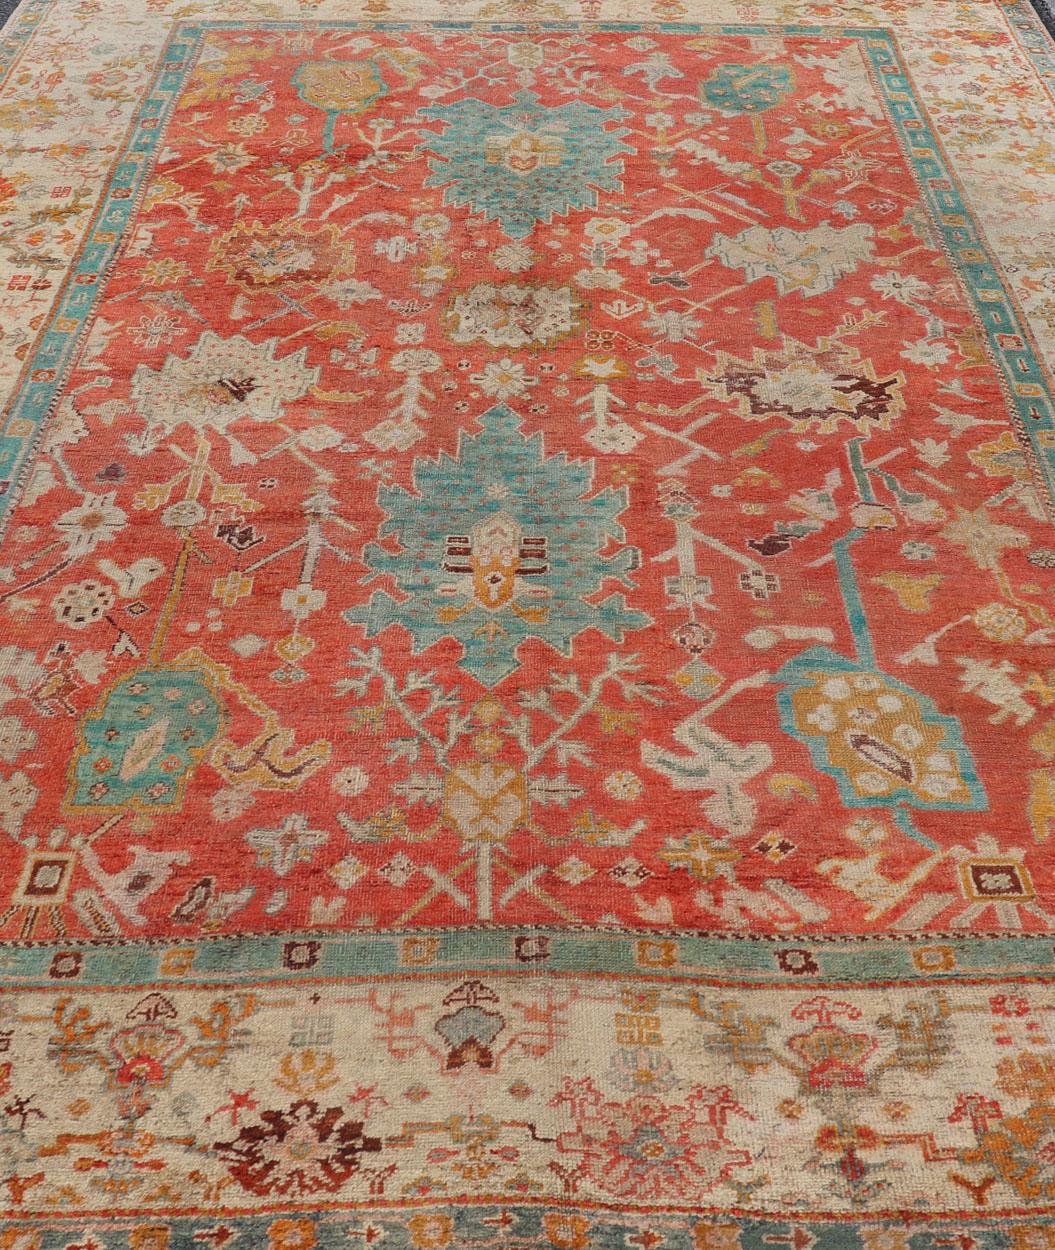 Antique Turkish Oushak In Tribal Motifs in Soft Coral, Blue, Marigold, and Cream For Sale 7